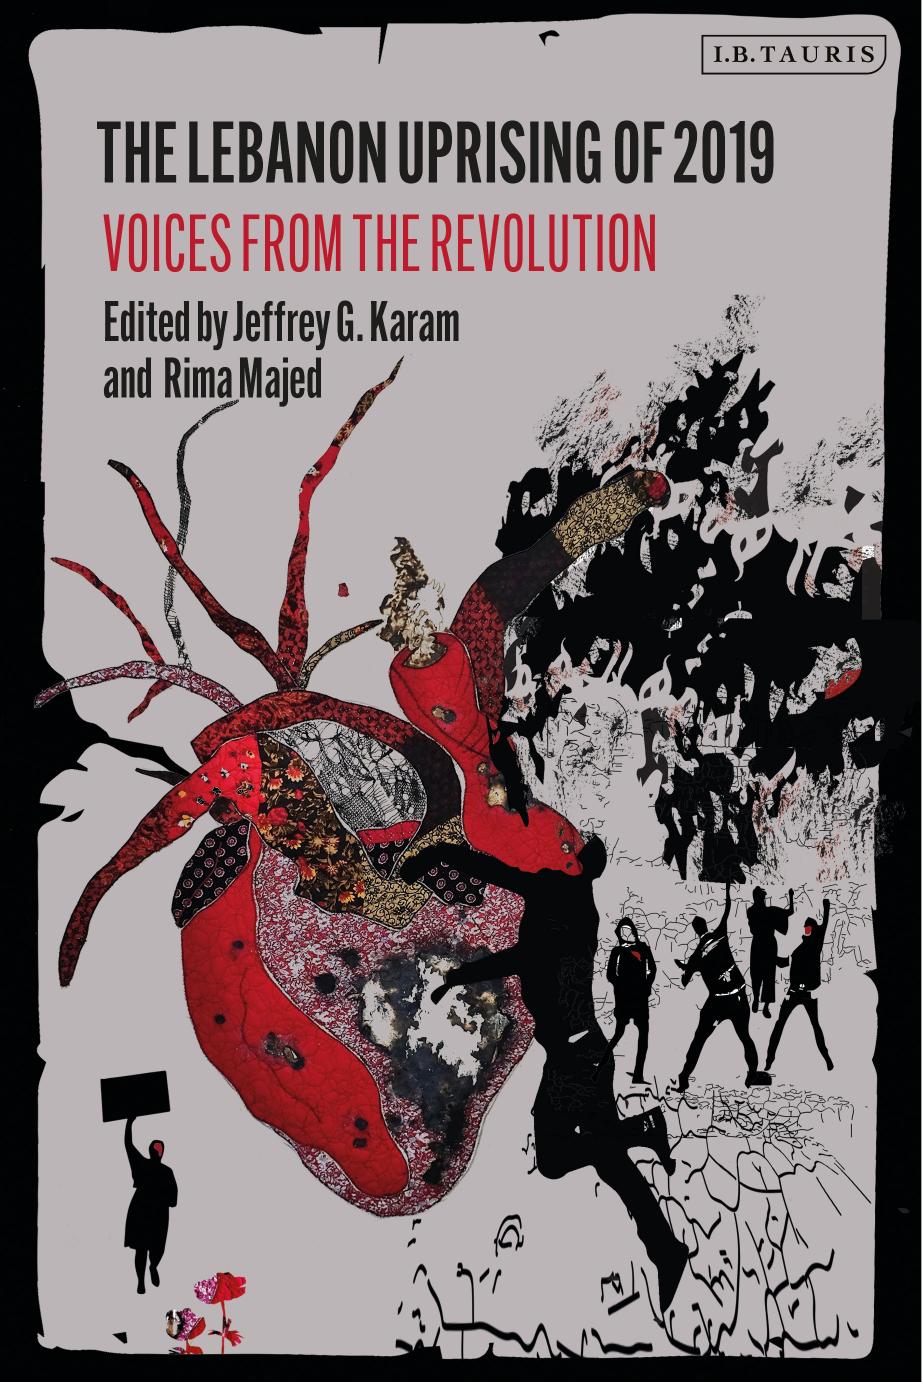 The Lebanon Uprising of 2019: Voices from the Revolution by Jeffrey G. Karam (editor) Rima Majed (editor)